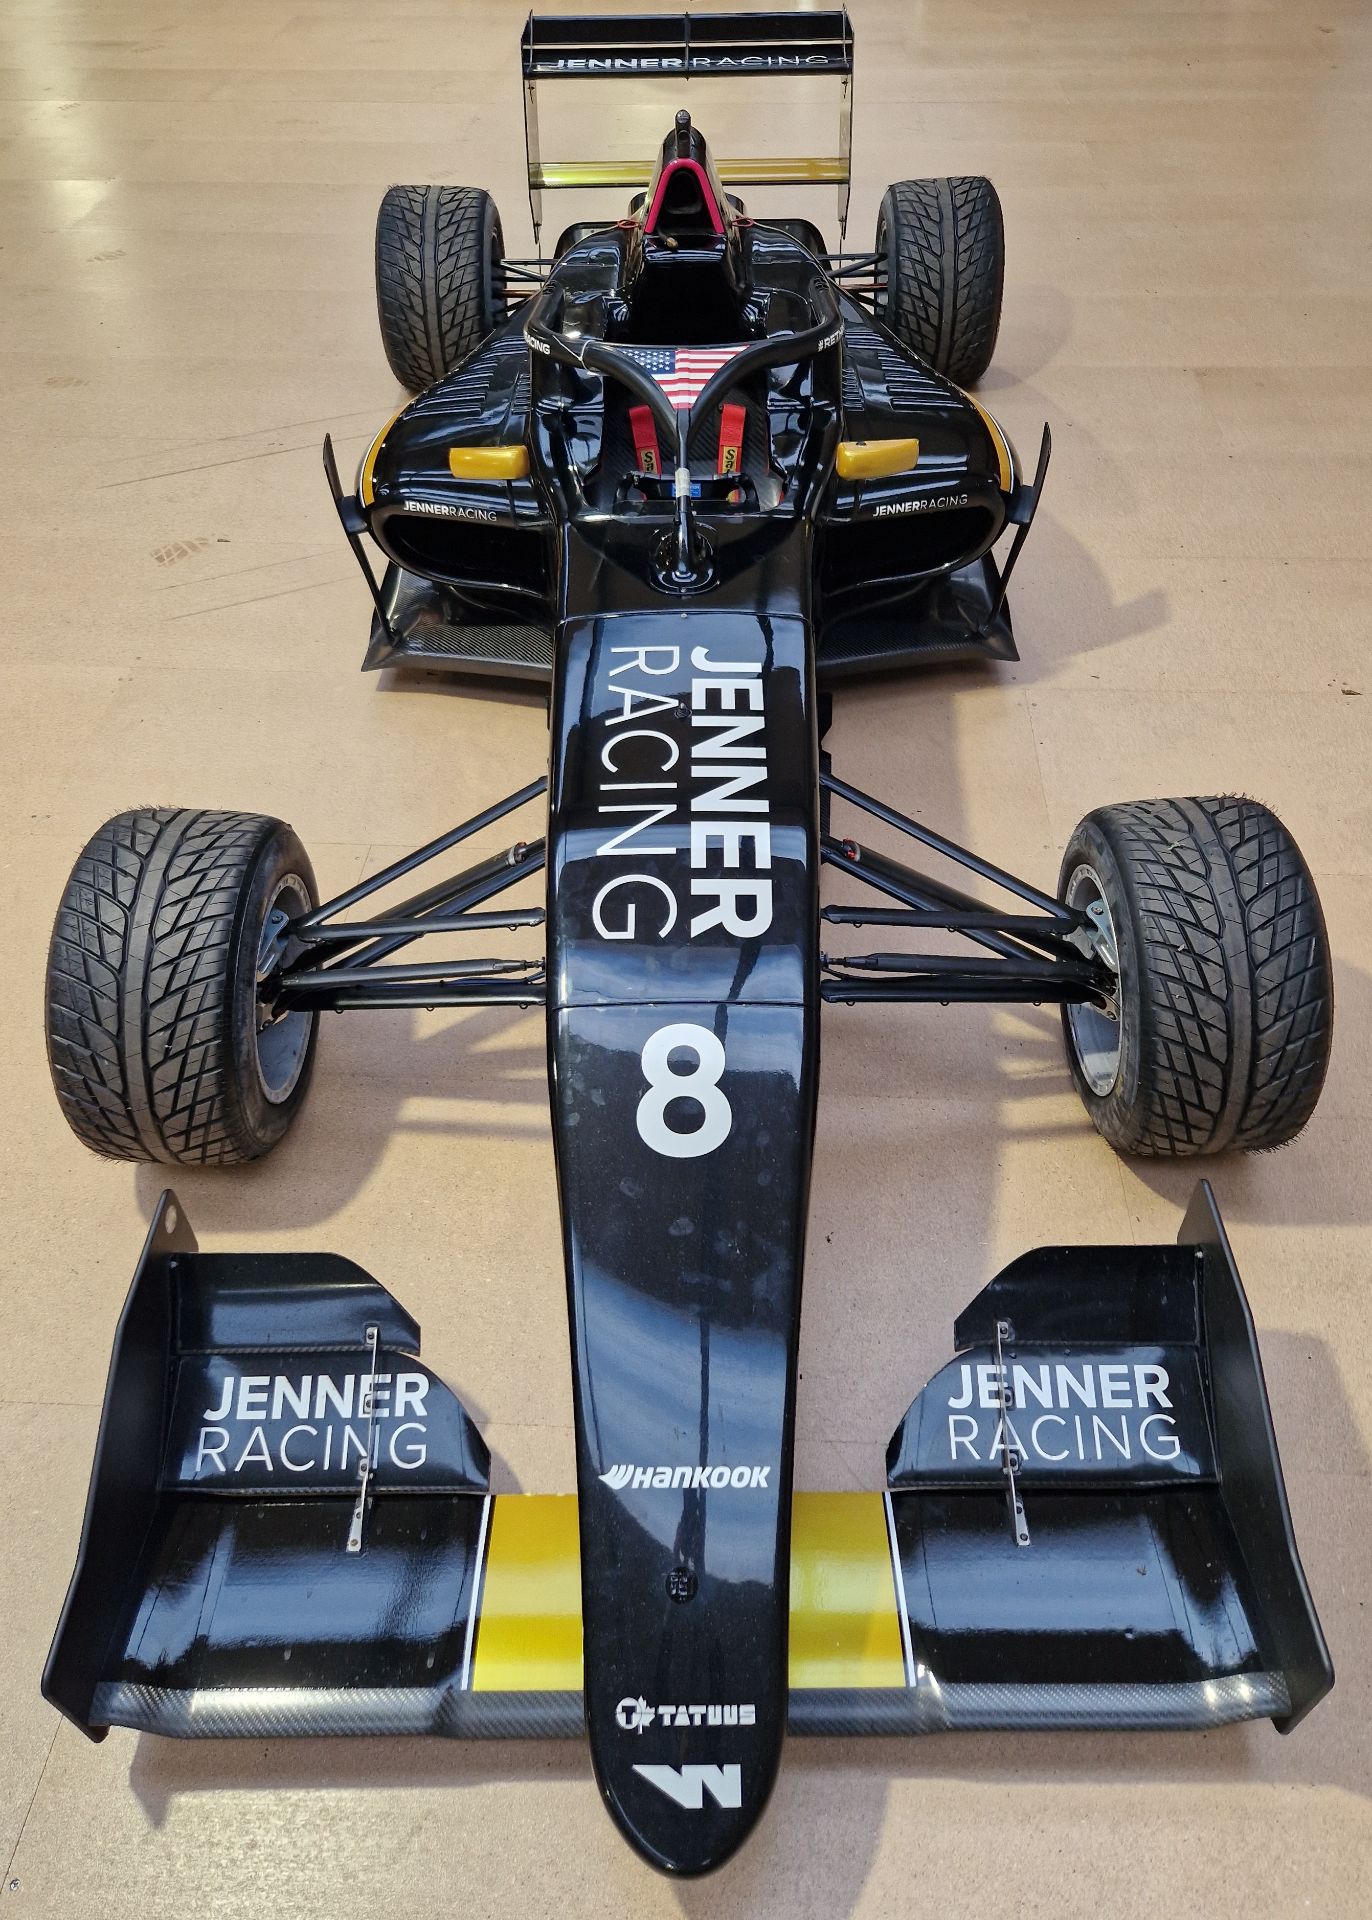 One TATUUS F3 T-318 Alfa Romeo Race Car Chassis No. 039 (2019) Finished in JENNER RACING Livery as - Bild 3 aus 10